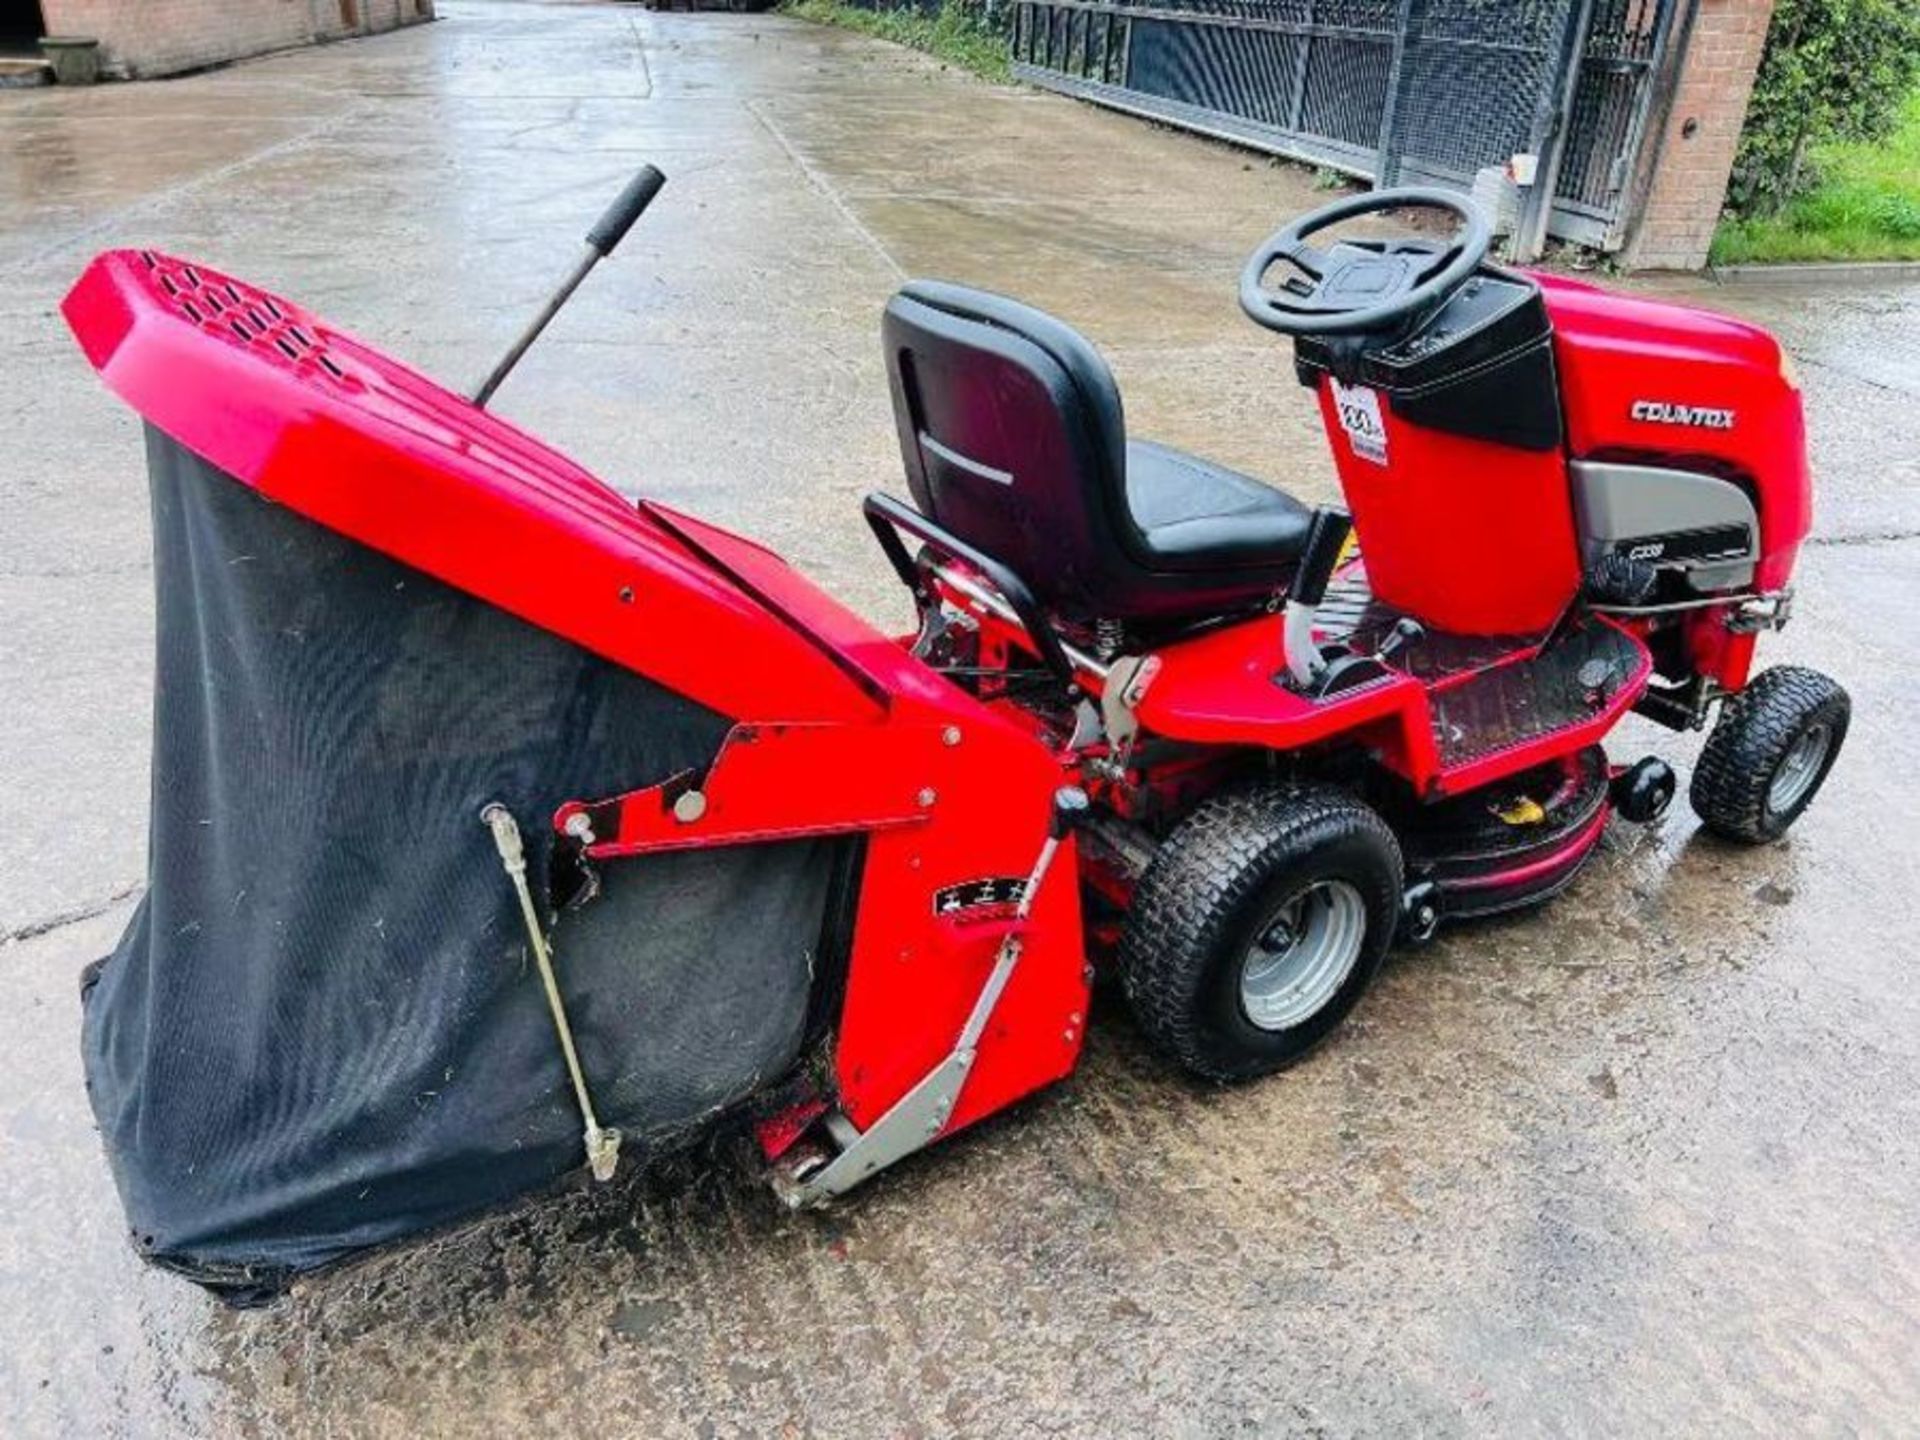 COUNTAX 330 RIDE ON MOWER *YEAR 2009* C/W COLLECTION BOX & HONDA ENGINE. - Image 2 of 12